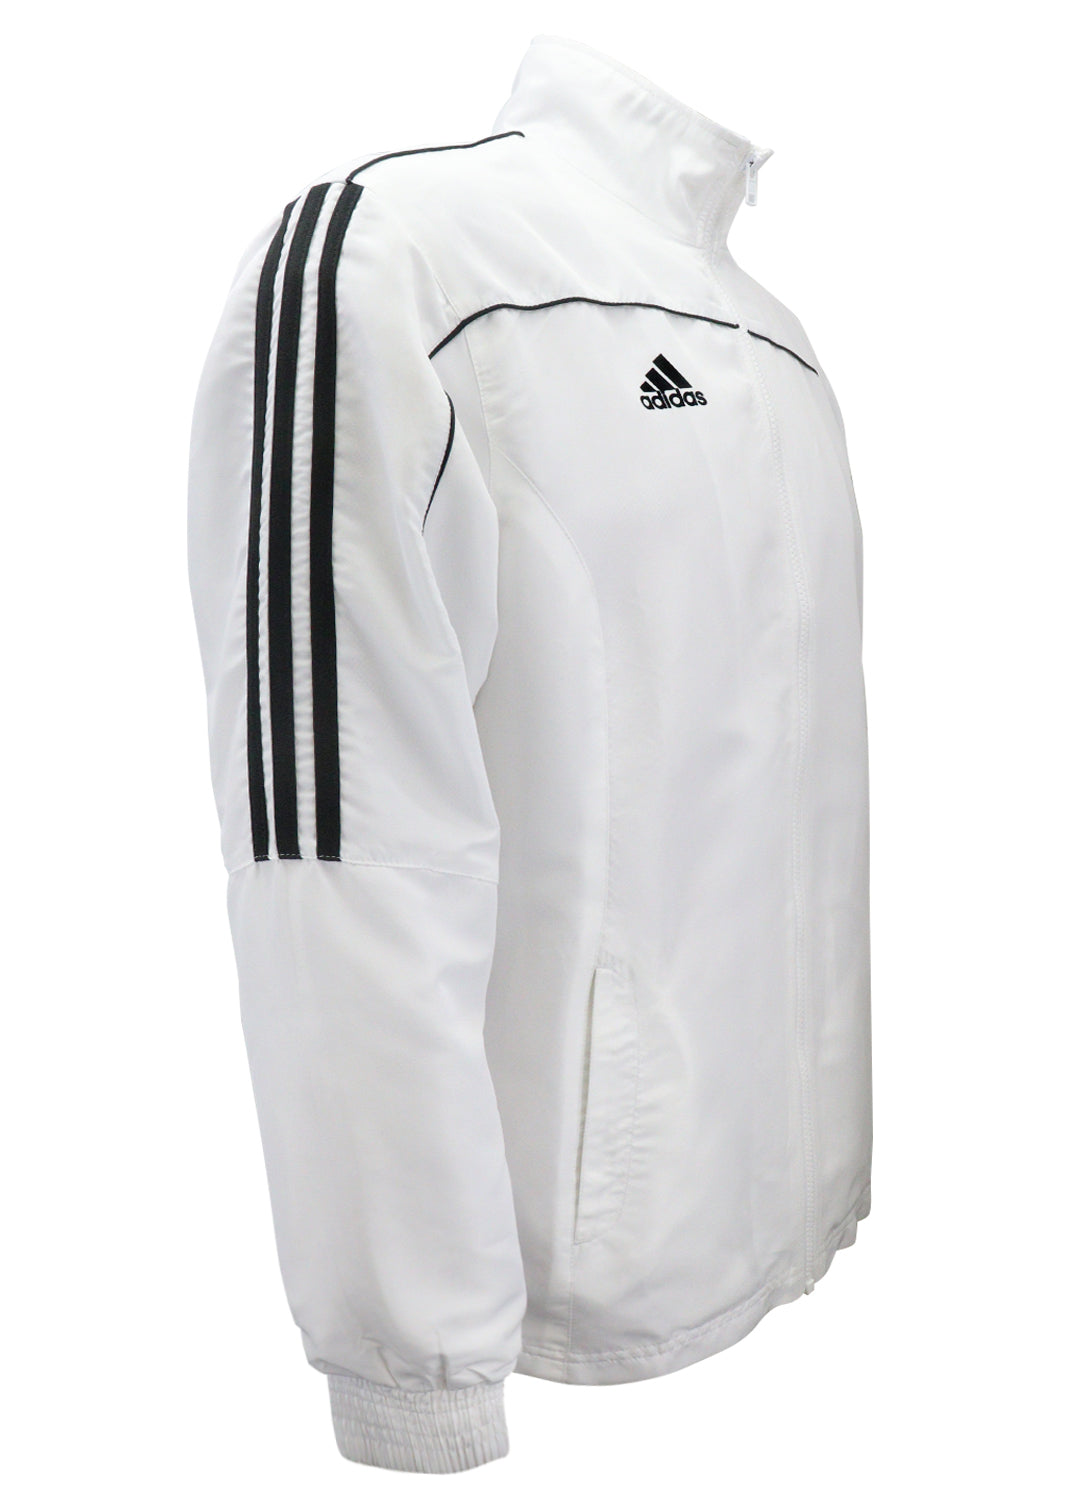 adidas White with Black Stripes Windbreaker Style Team Jacket Side View